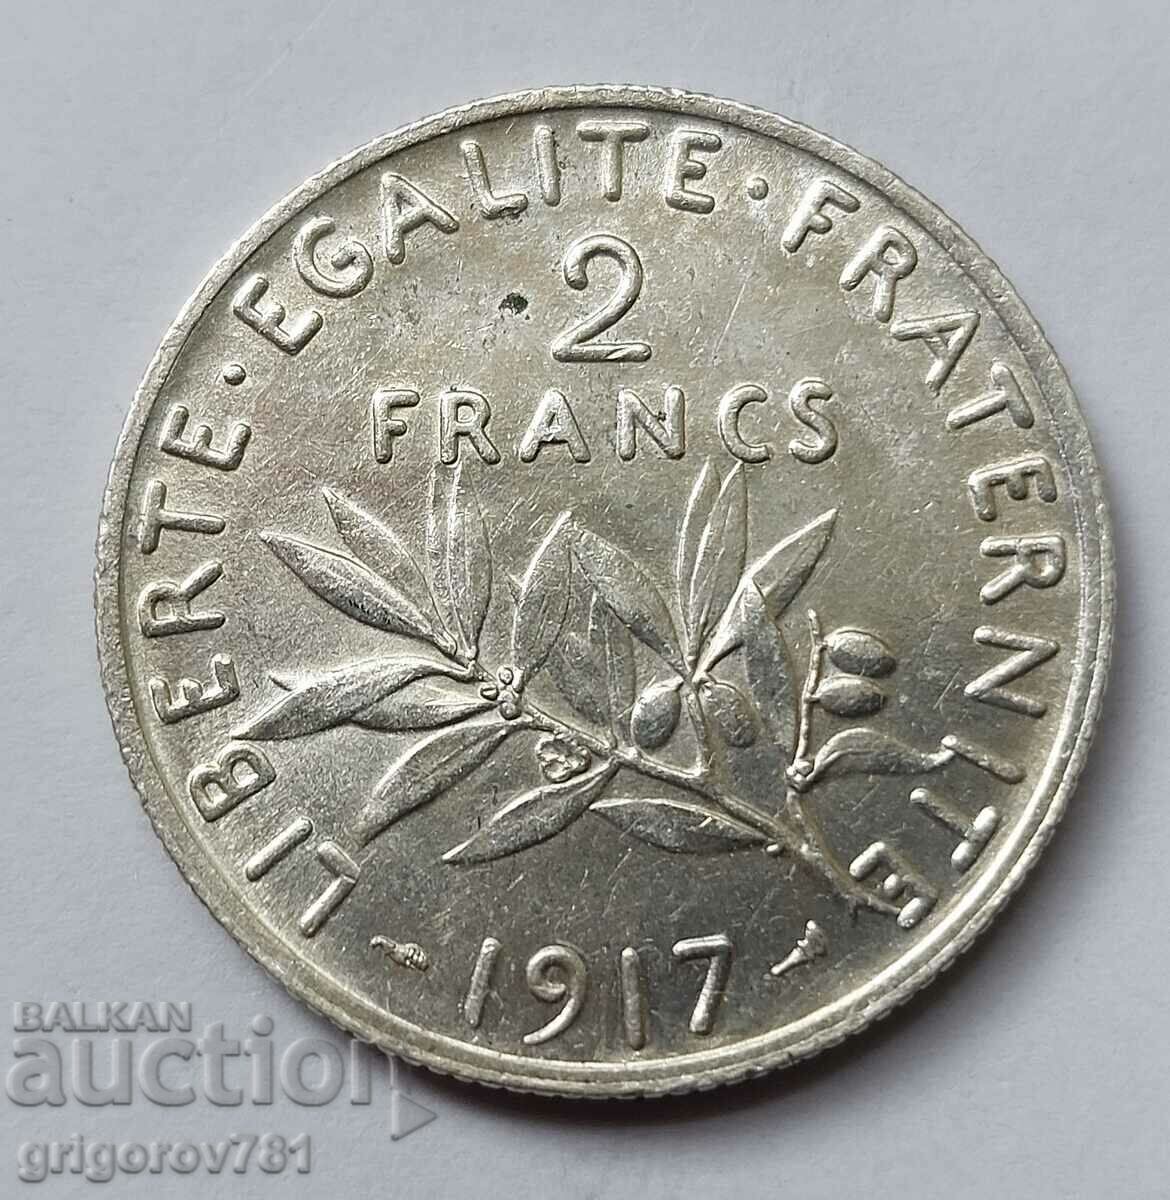 2 Francs Silver France 1917 - Silver Coin #103